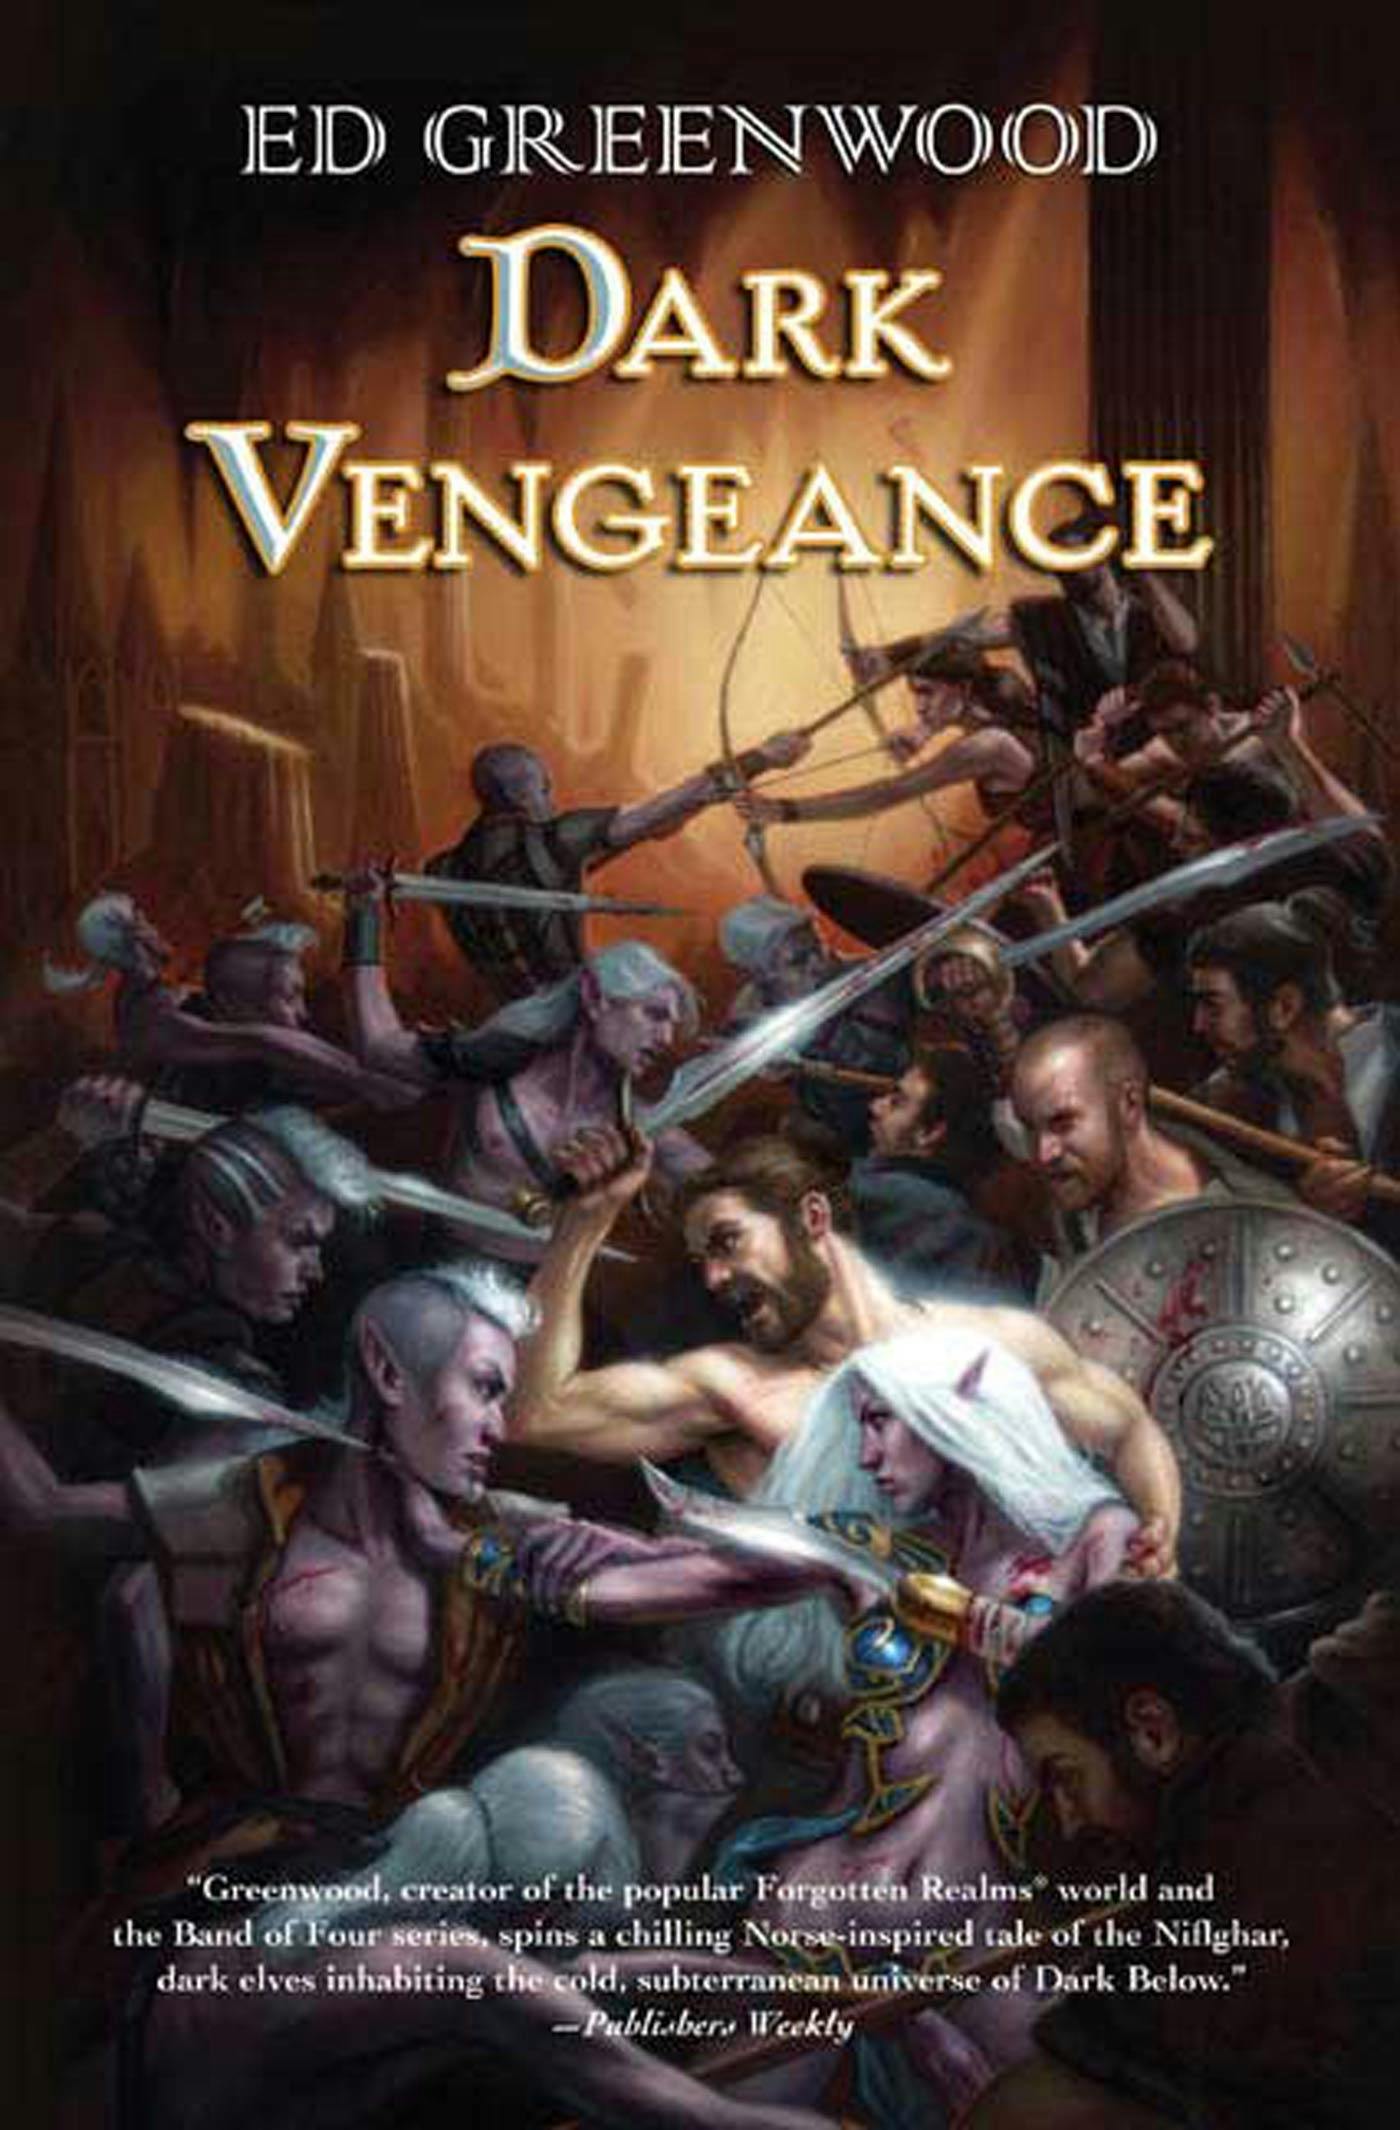 Cover for the book titled as: Dark Vengeance